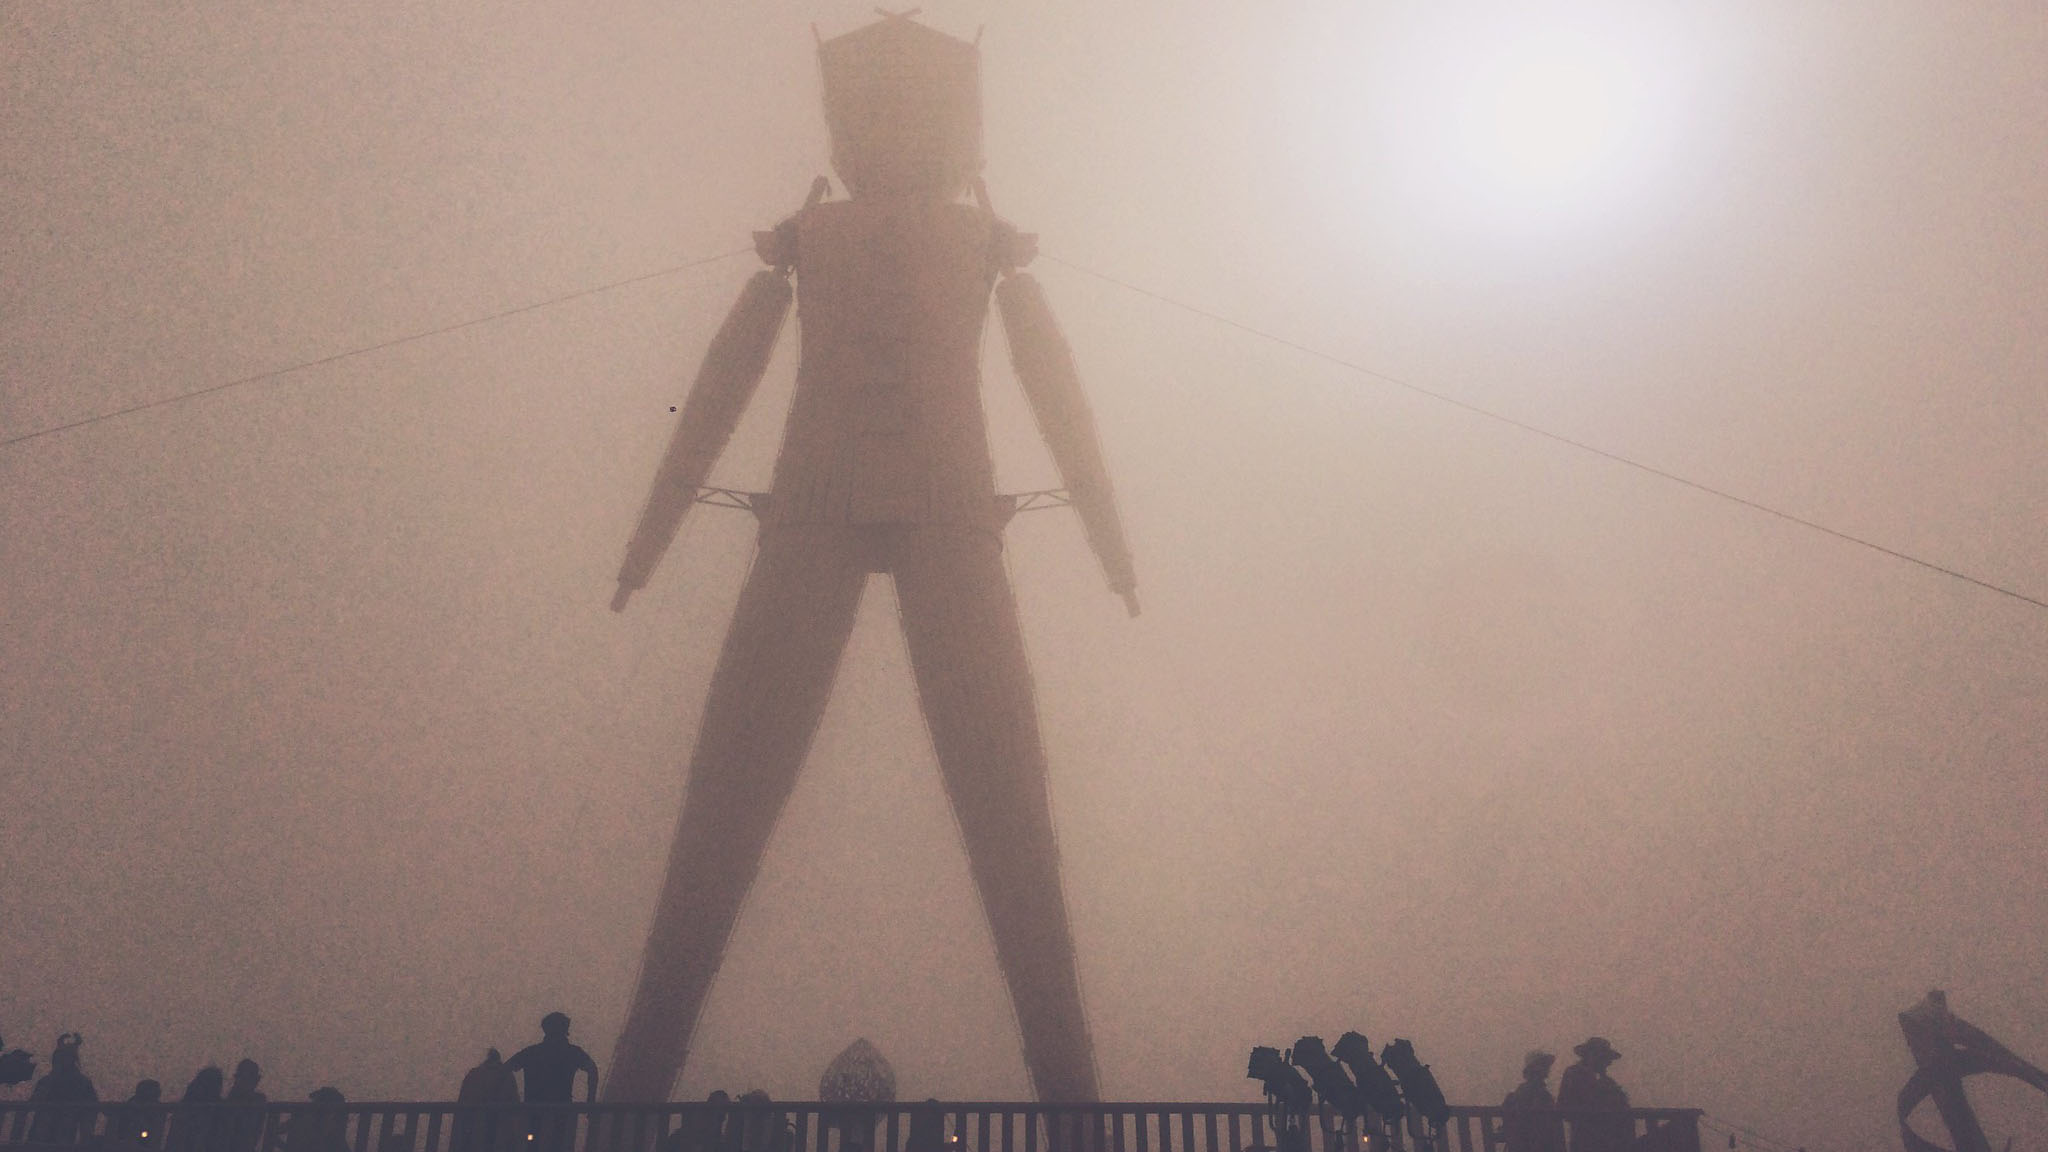 The iconic Burning Man stands over the festival. Photo by Kevin Cheng